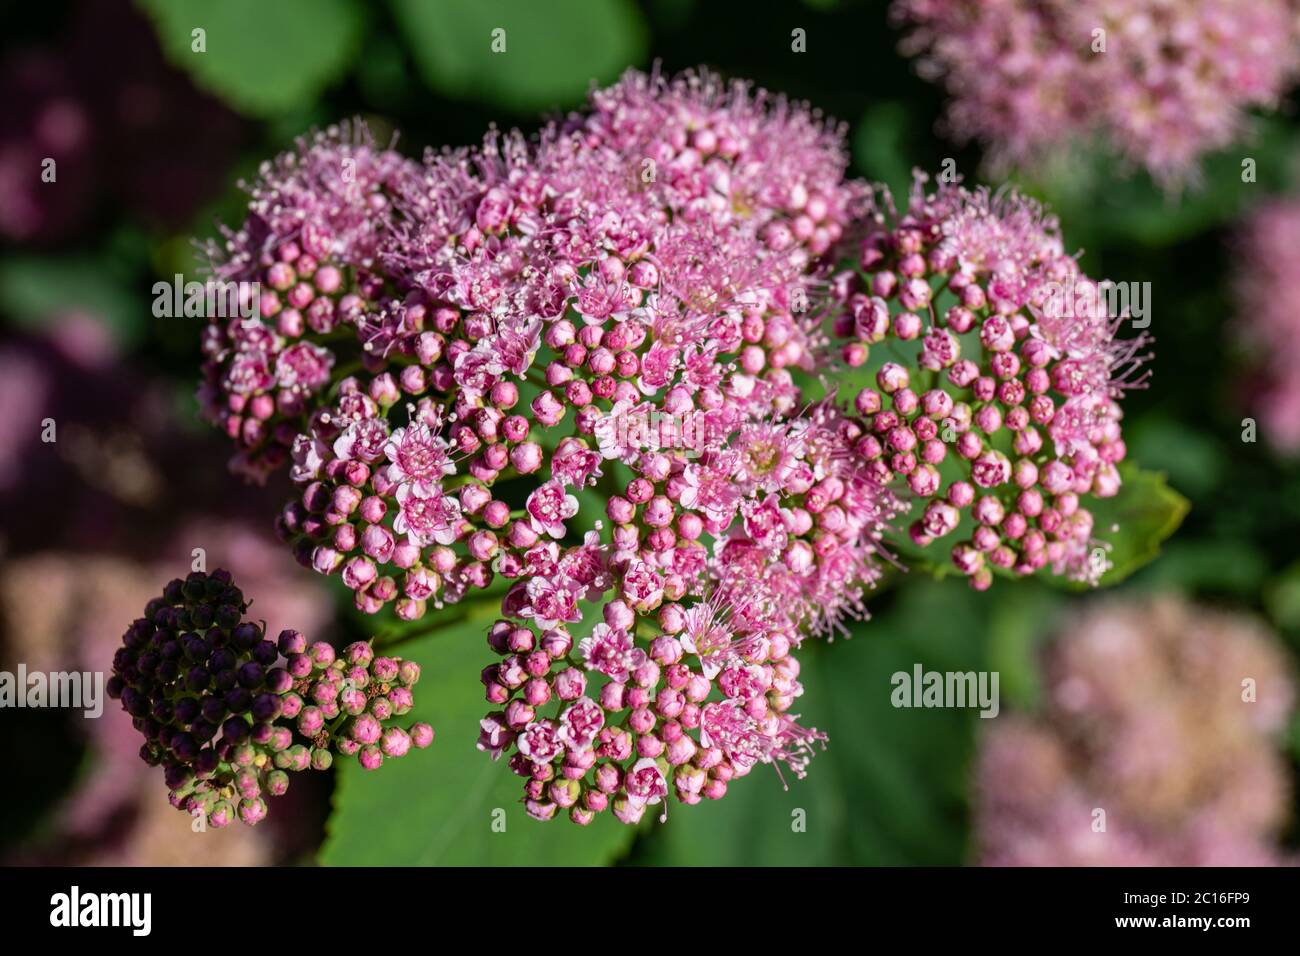 Small pink flowers of beauverd spirea (Spiraea stevenii) clustered in inflorescences Stock Photo